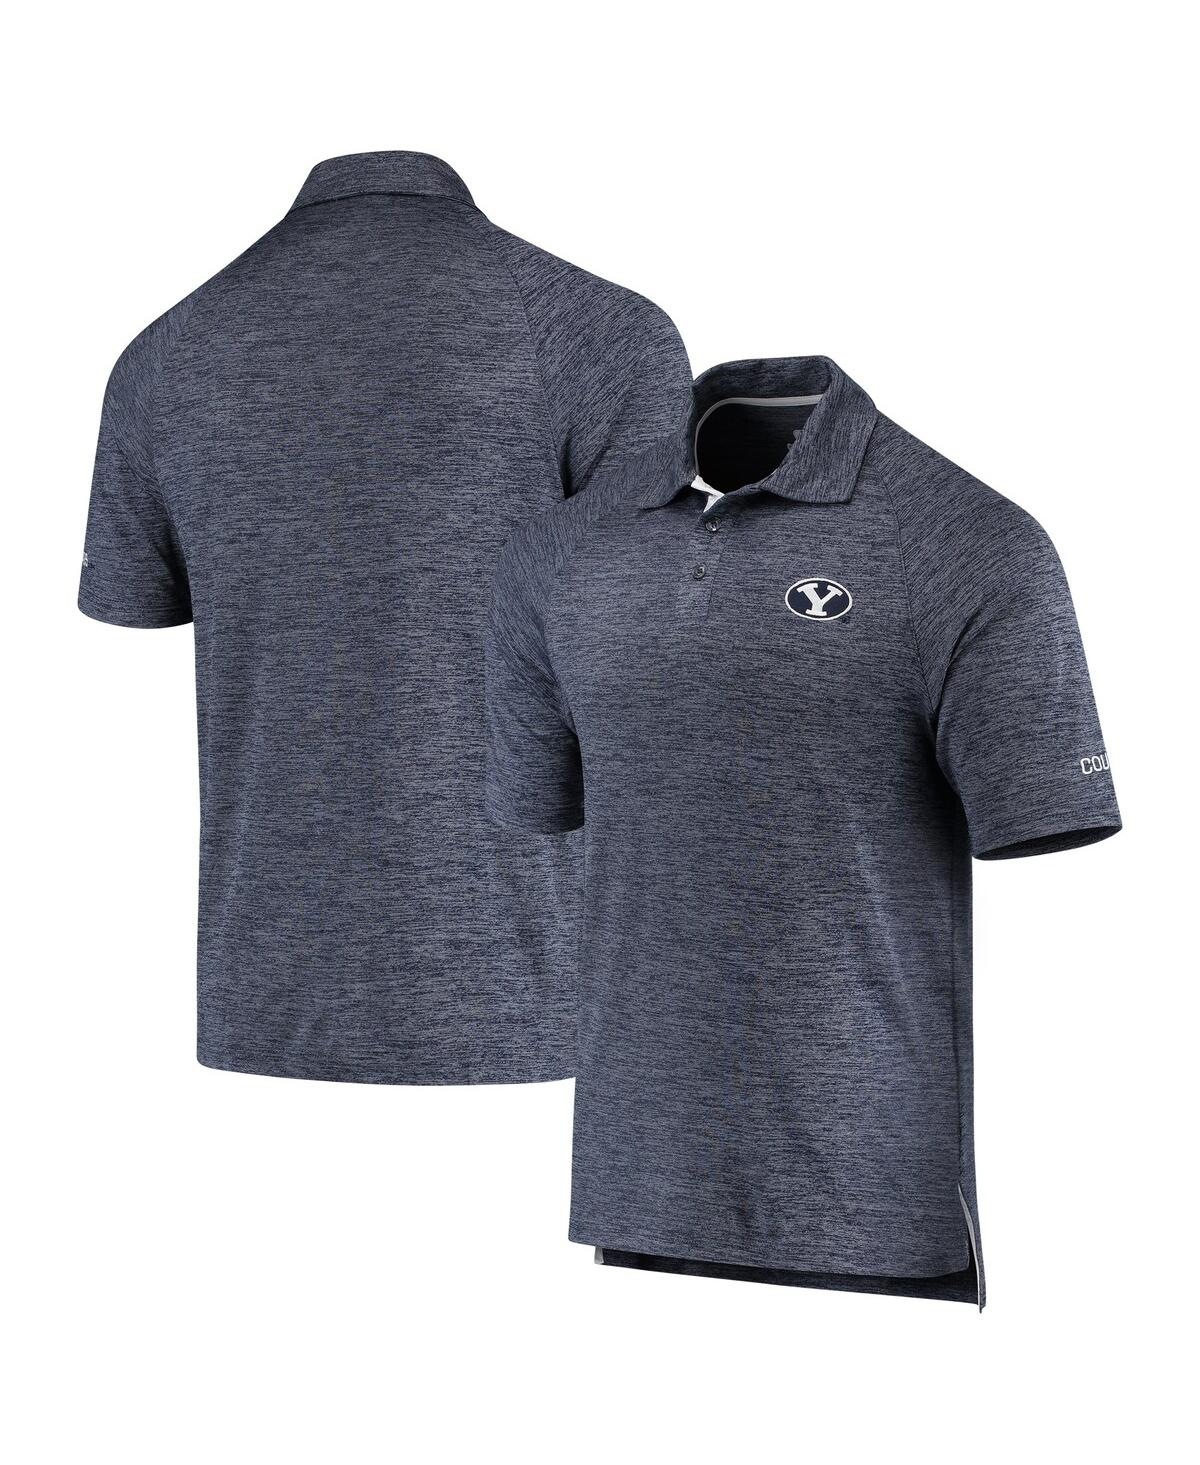 Men's Colosseum Heathered Navy Byu Cougars Down Swing Polo Shirt - Heathered Navy